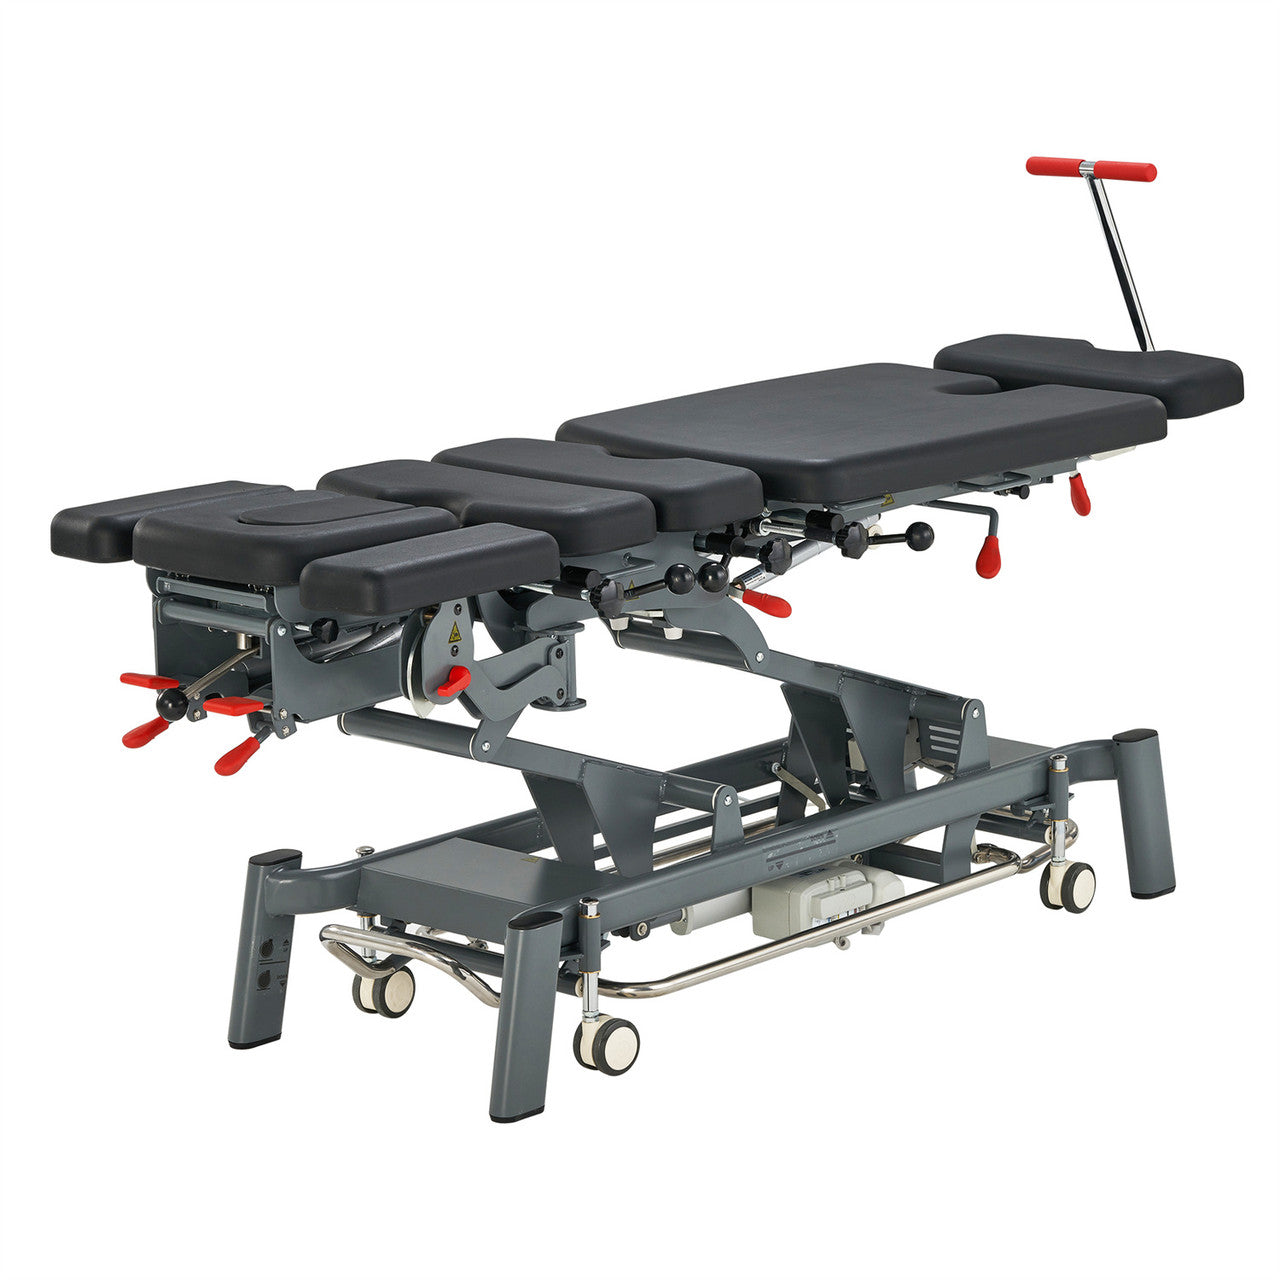 SpaMarc . OsseFlex Pro (Black) . Electric chiropractic Table . 4 Drop . FDA APPROVED